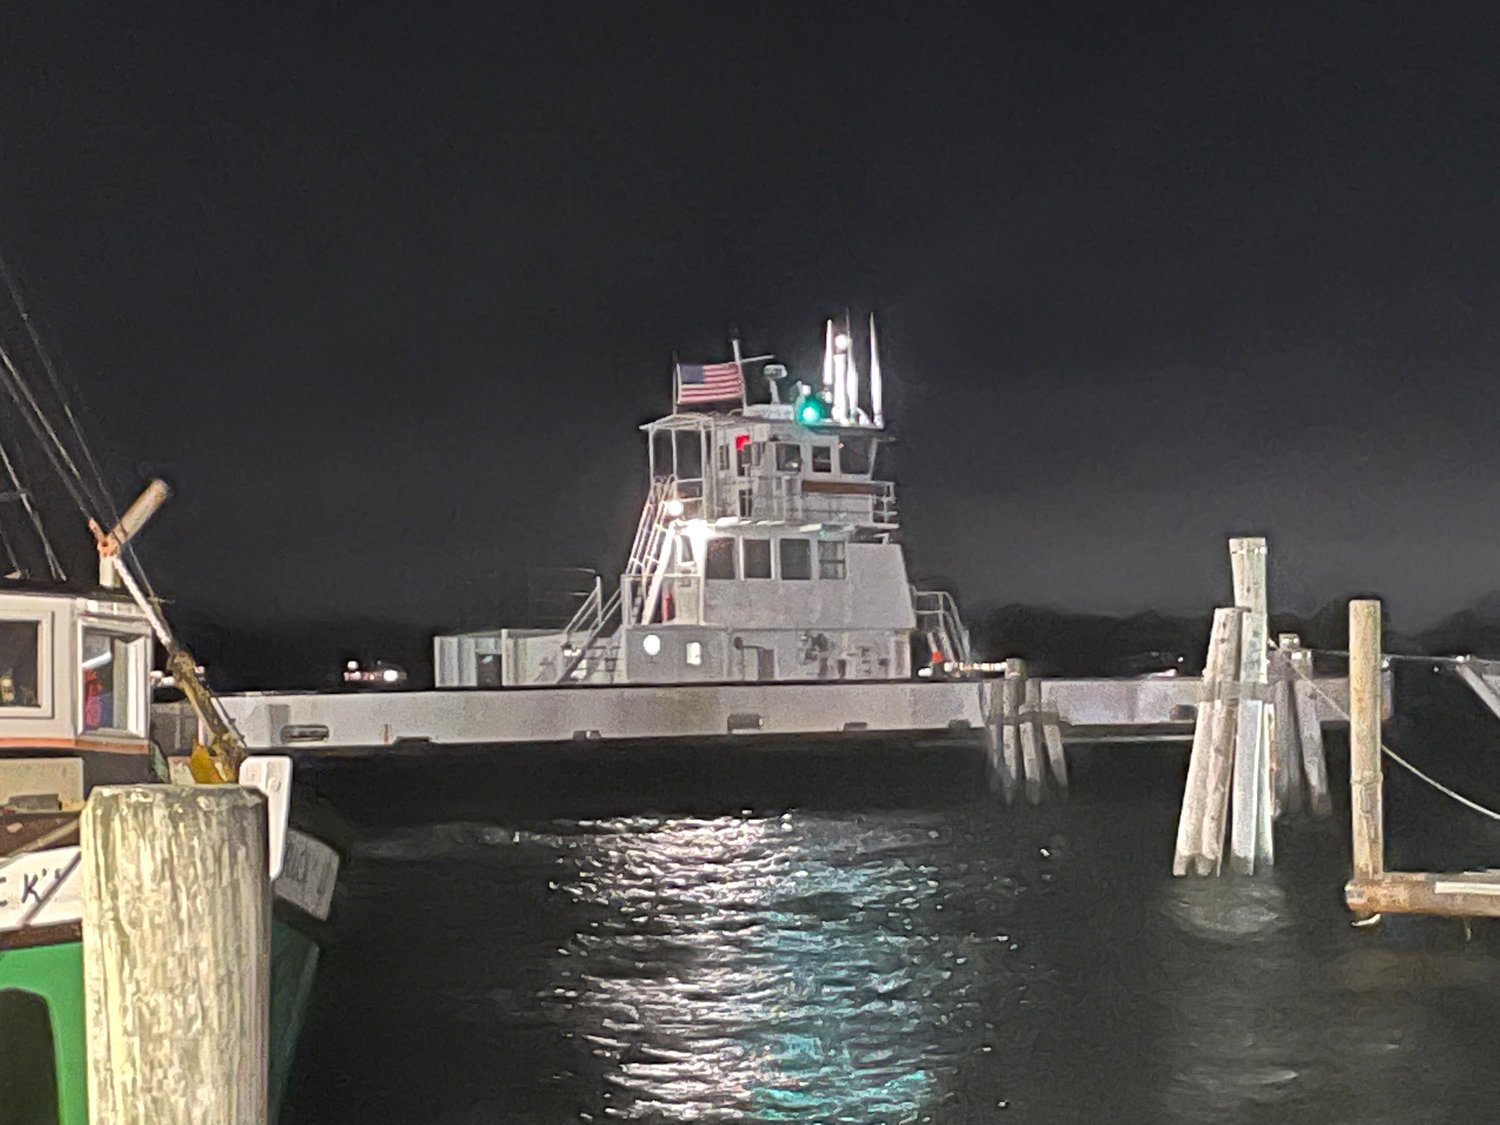 The Prudence Island Ferry arriving in Bristol several hours after reporting a passenger overboard around 6 p.m. on Monday, Dec. 6.